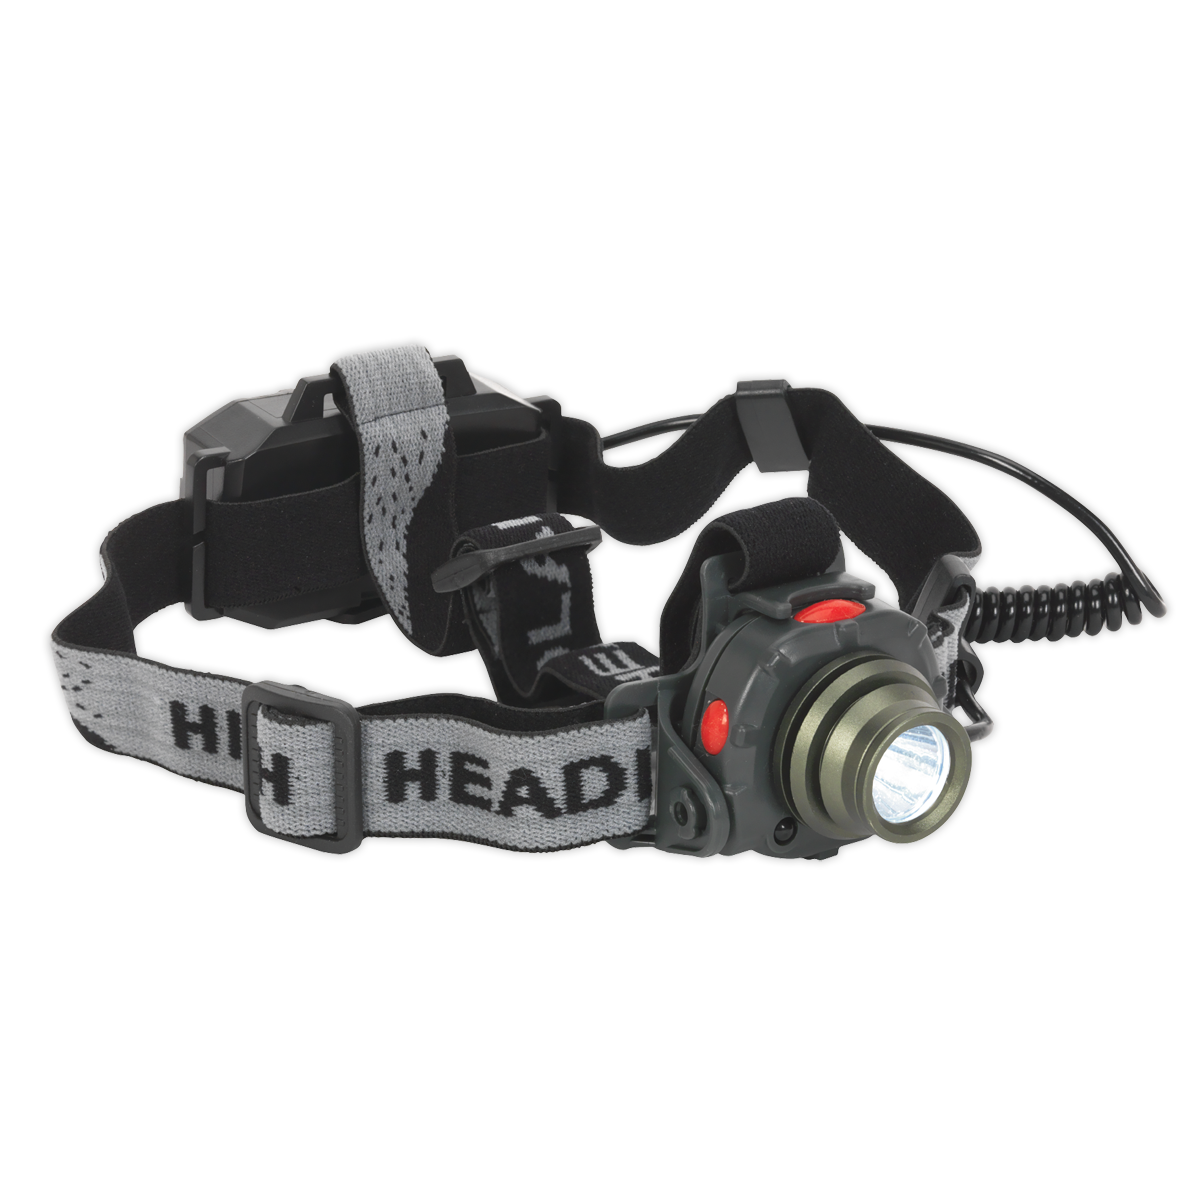 Head Torch 3W CREE LED Auto-Sensor Rechargeable | Hands-free 3W CREE XPE LED spotlight with adjustable inclination to direct light as required. | toolforce.ie